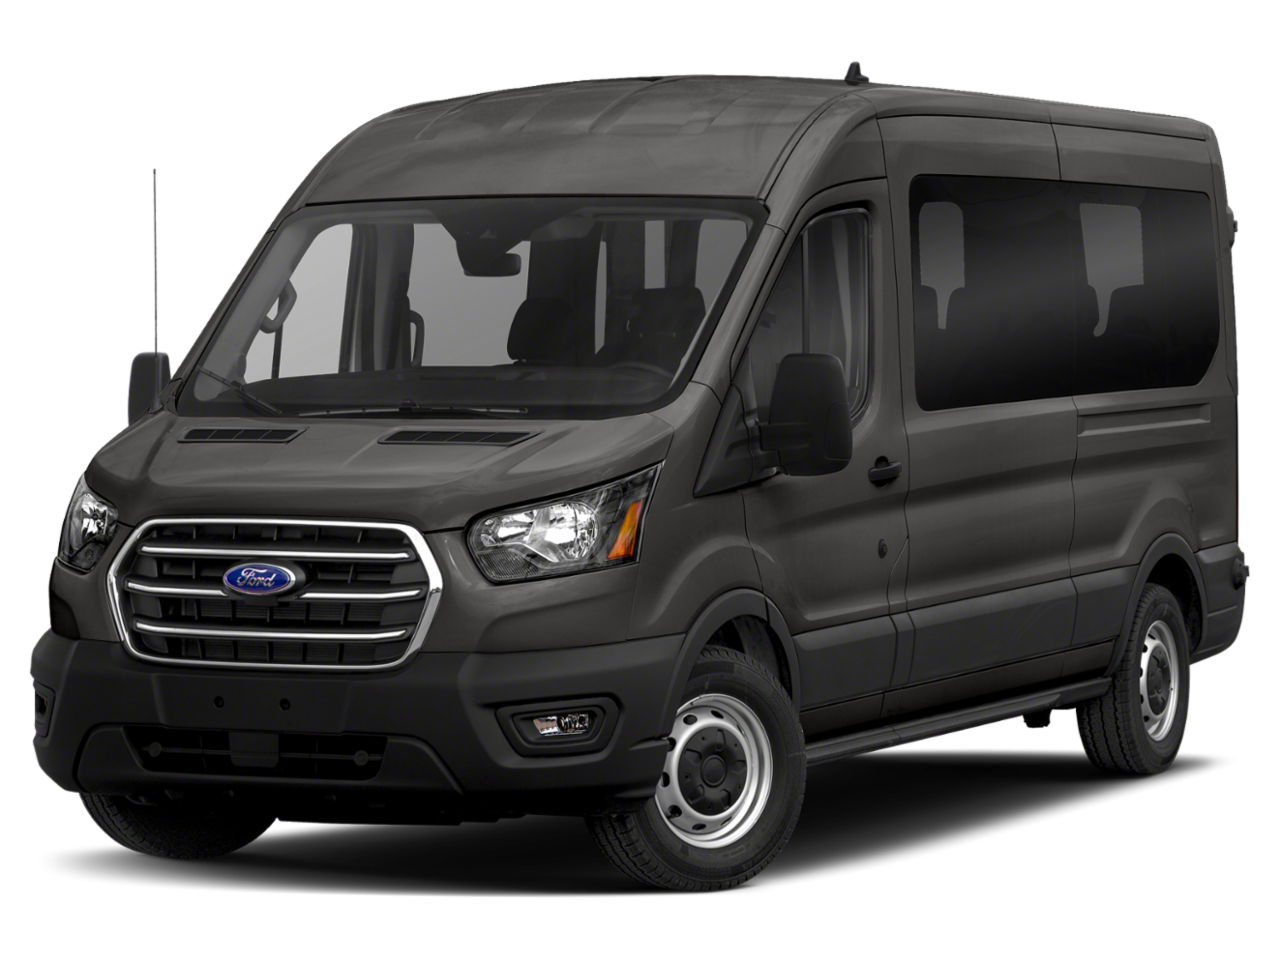 New Ford Transit Passenger Wagon from your Seymour, IN dealership, Bob